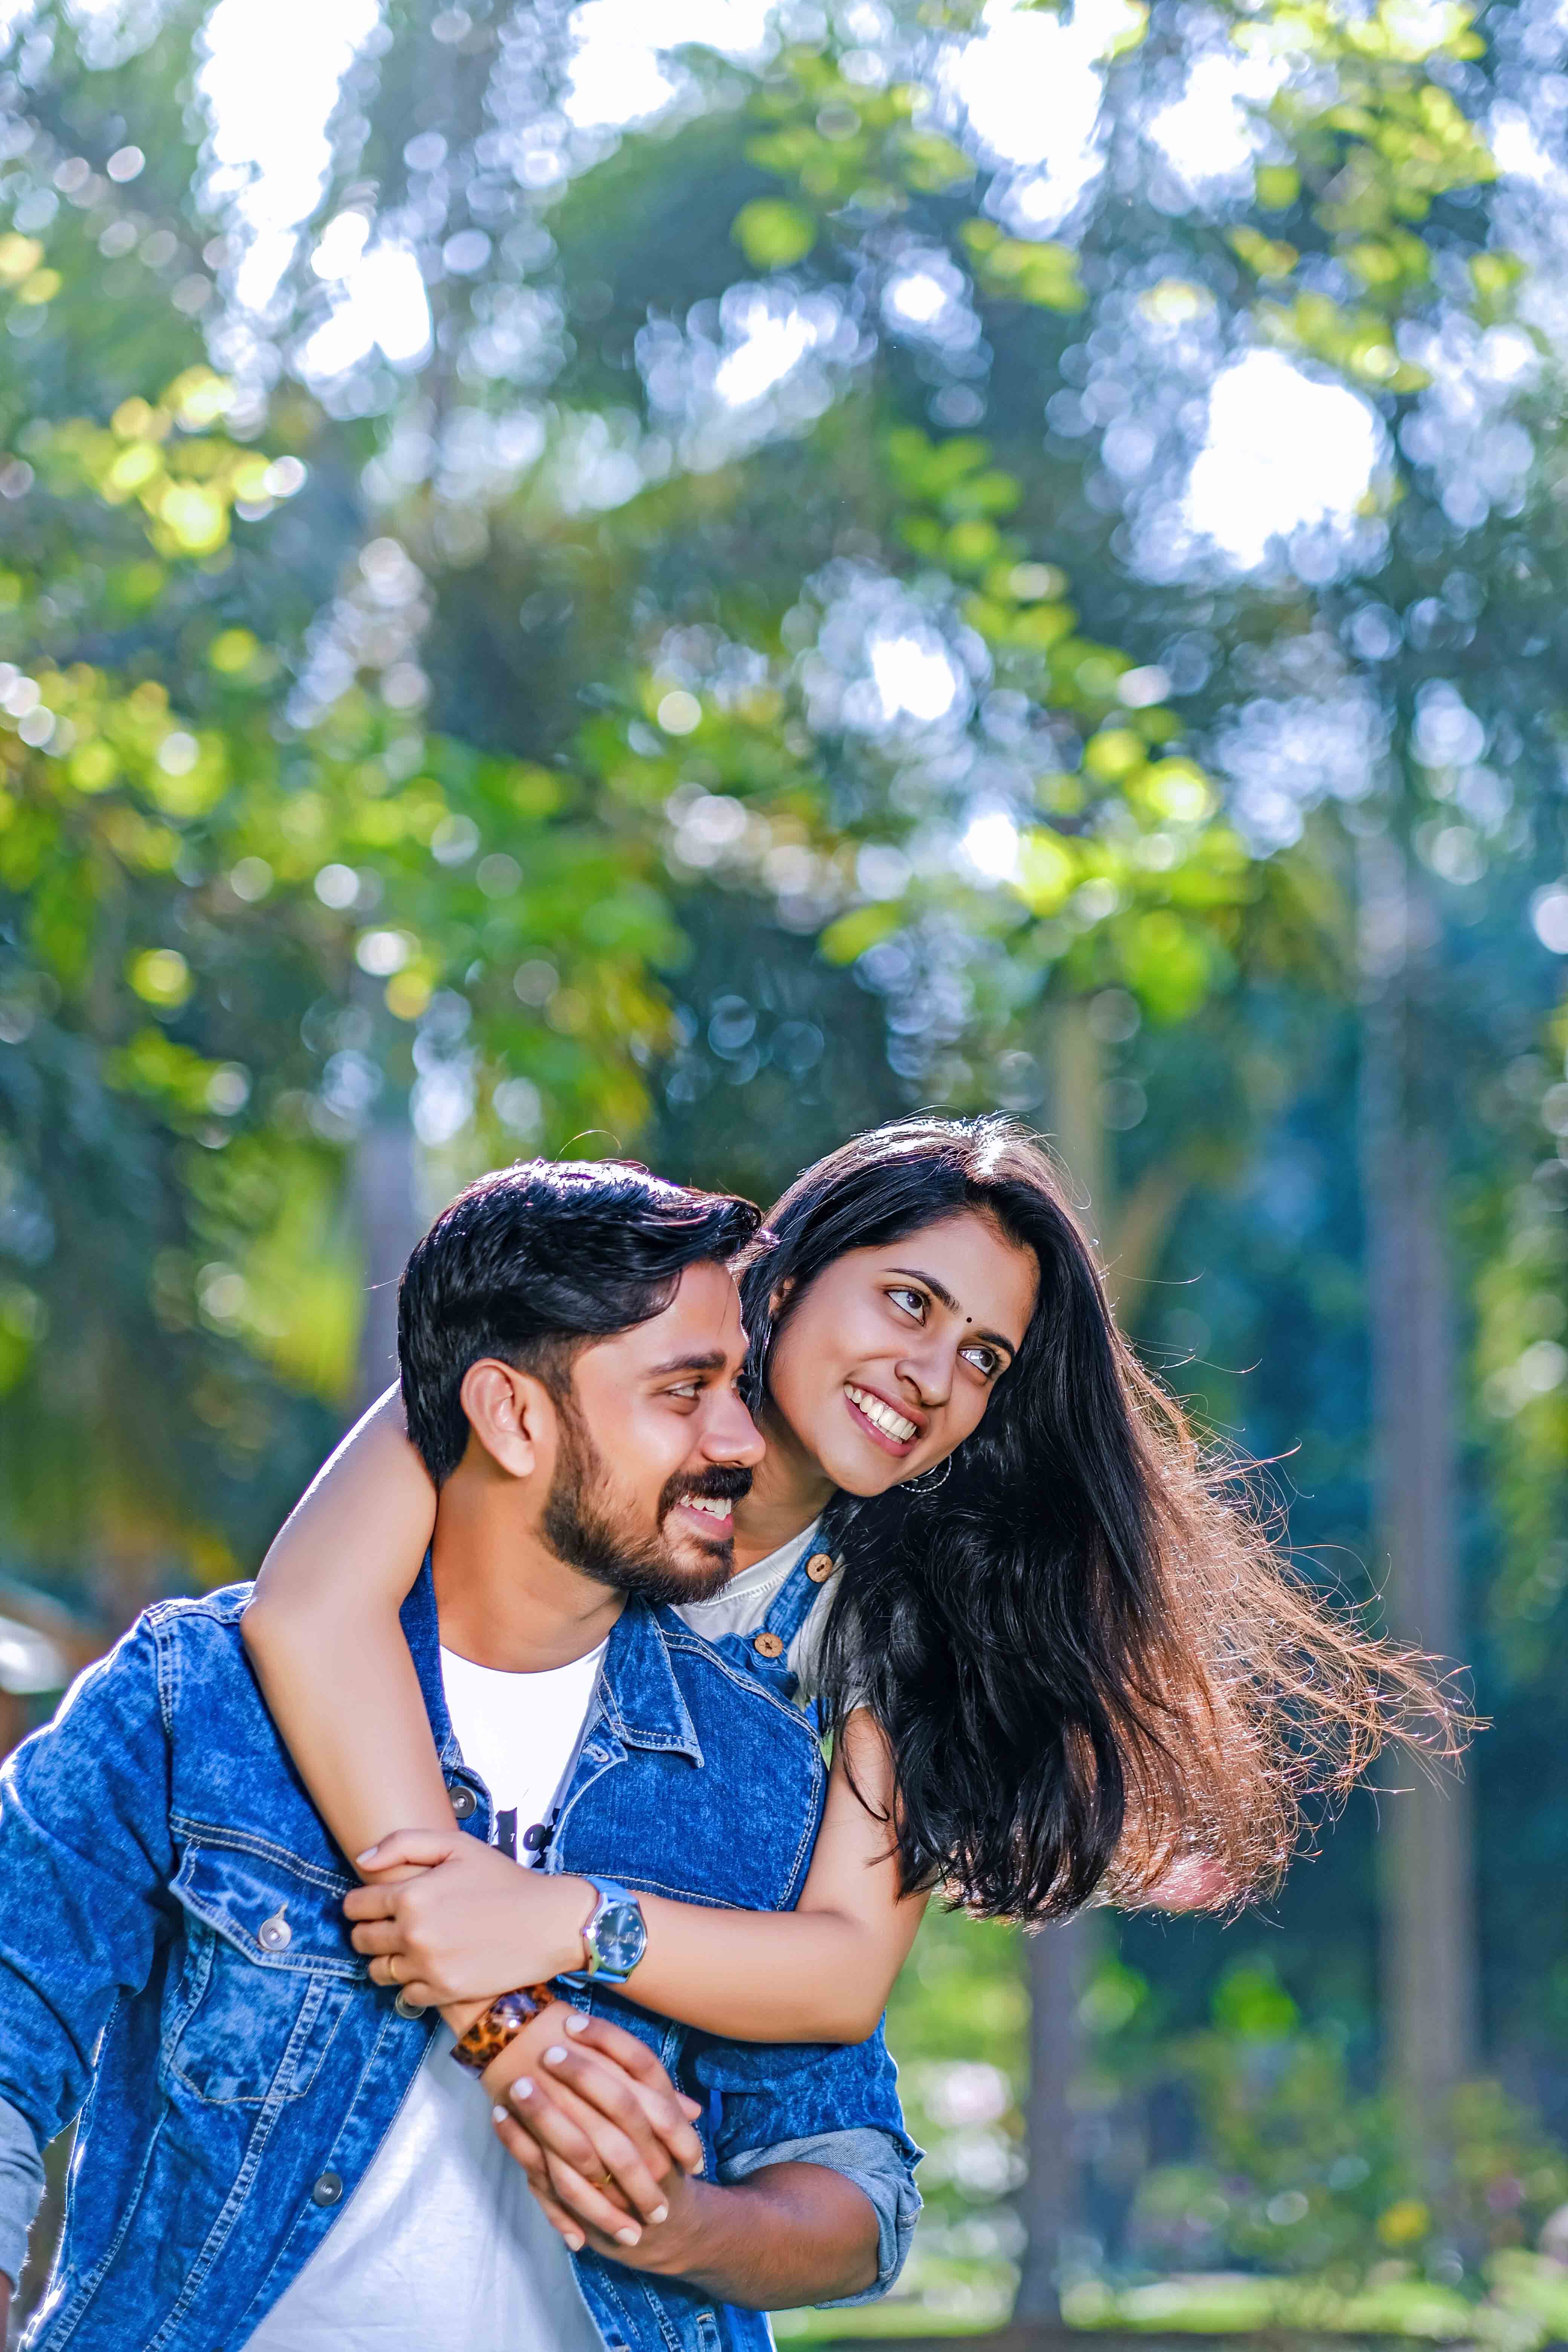 5 Post Wedding Ideas Sessions by Varun and Sindhuja from camrin films | Bff photoshoot  poses, Post wedding, Indian wedding photography poses